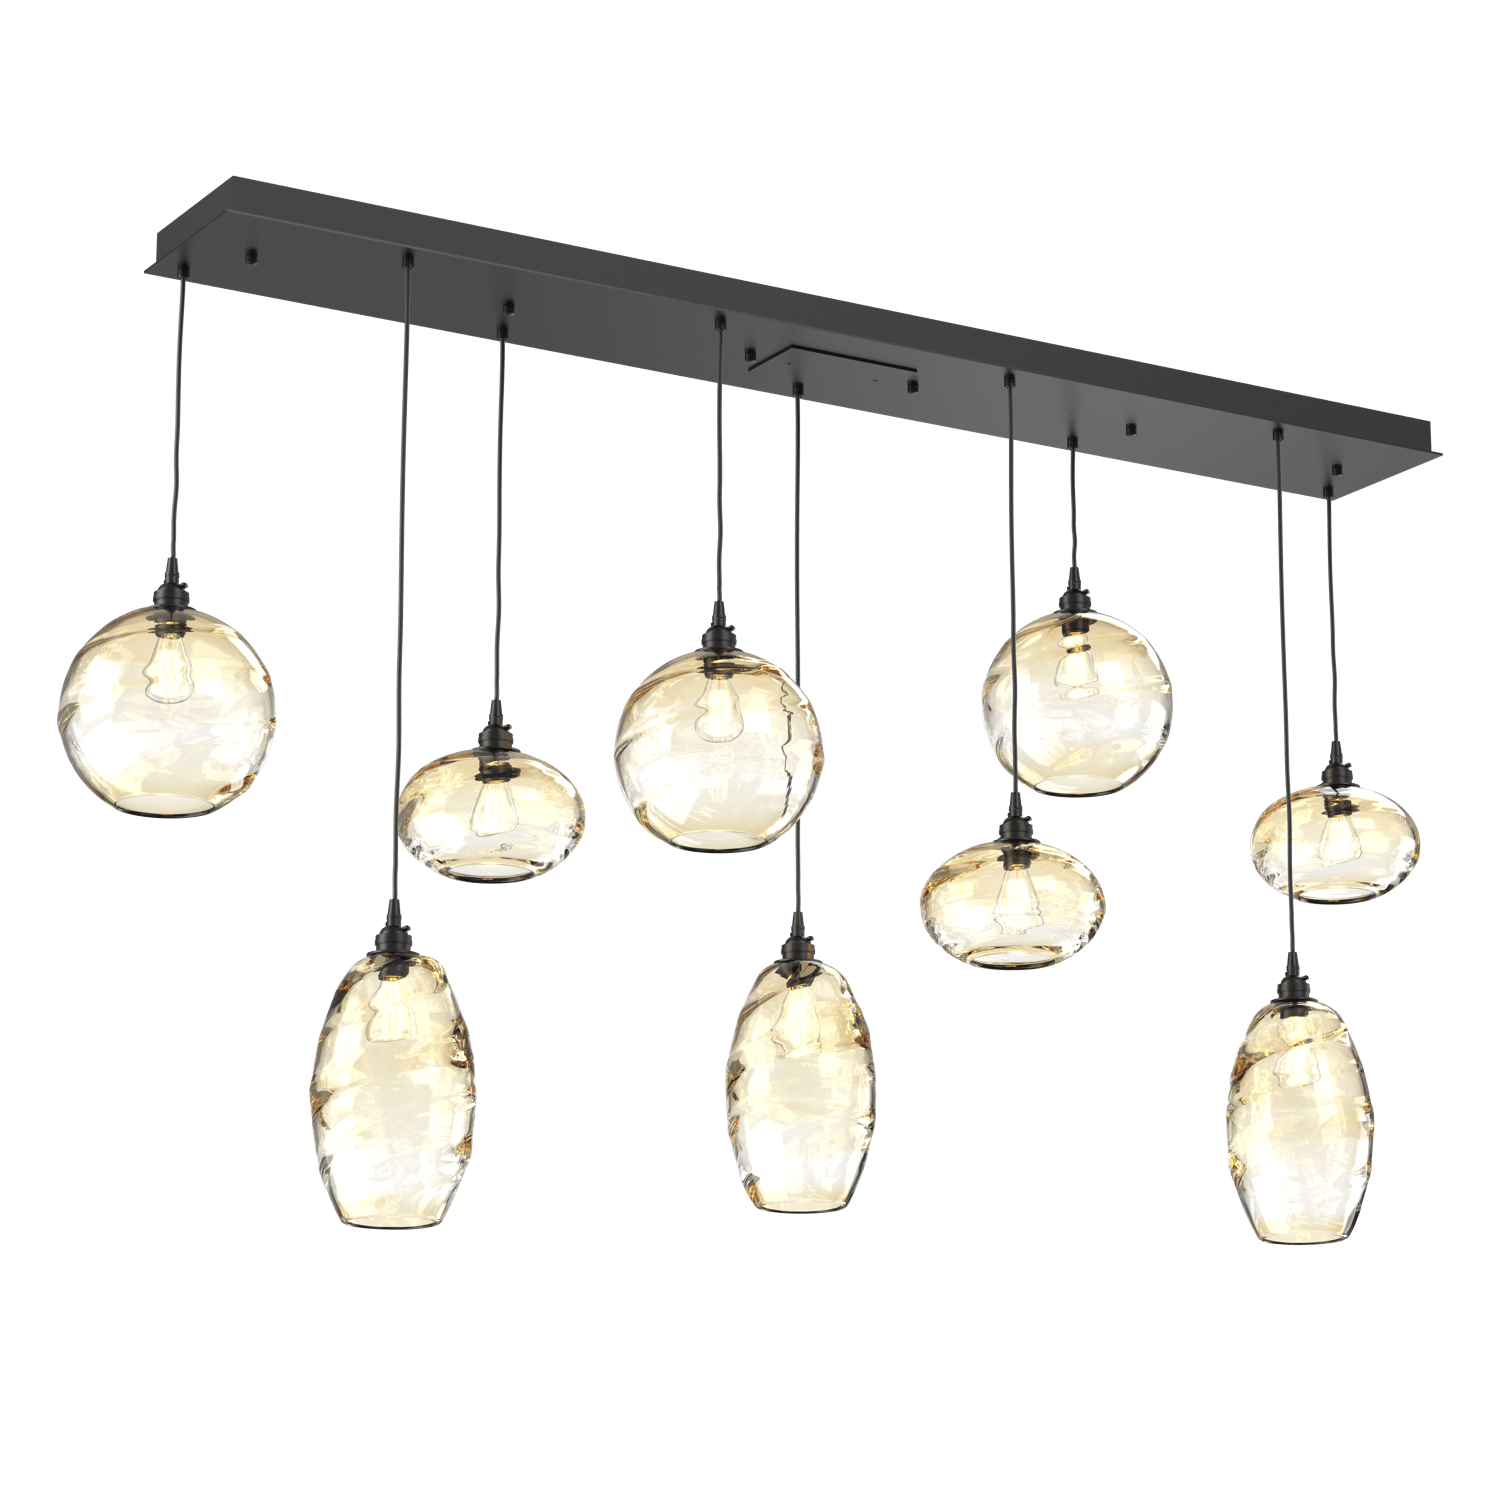 PLB0048-09-MB-OA-Hammerton-Studio-Optic-Blown-Glass-Misto-9-light-linear-pendant-chandelier-with-matte-black-finish-and-optic-amber-blown-glass-shades-and-incandescent-lamping